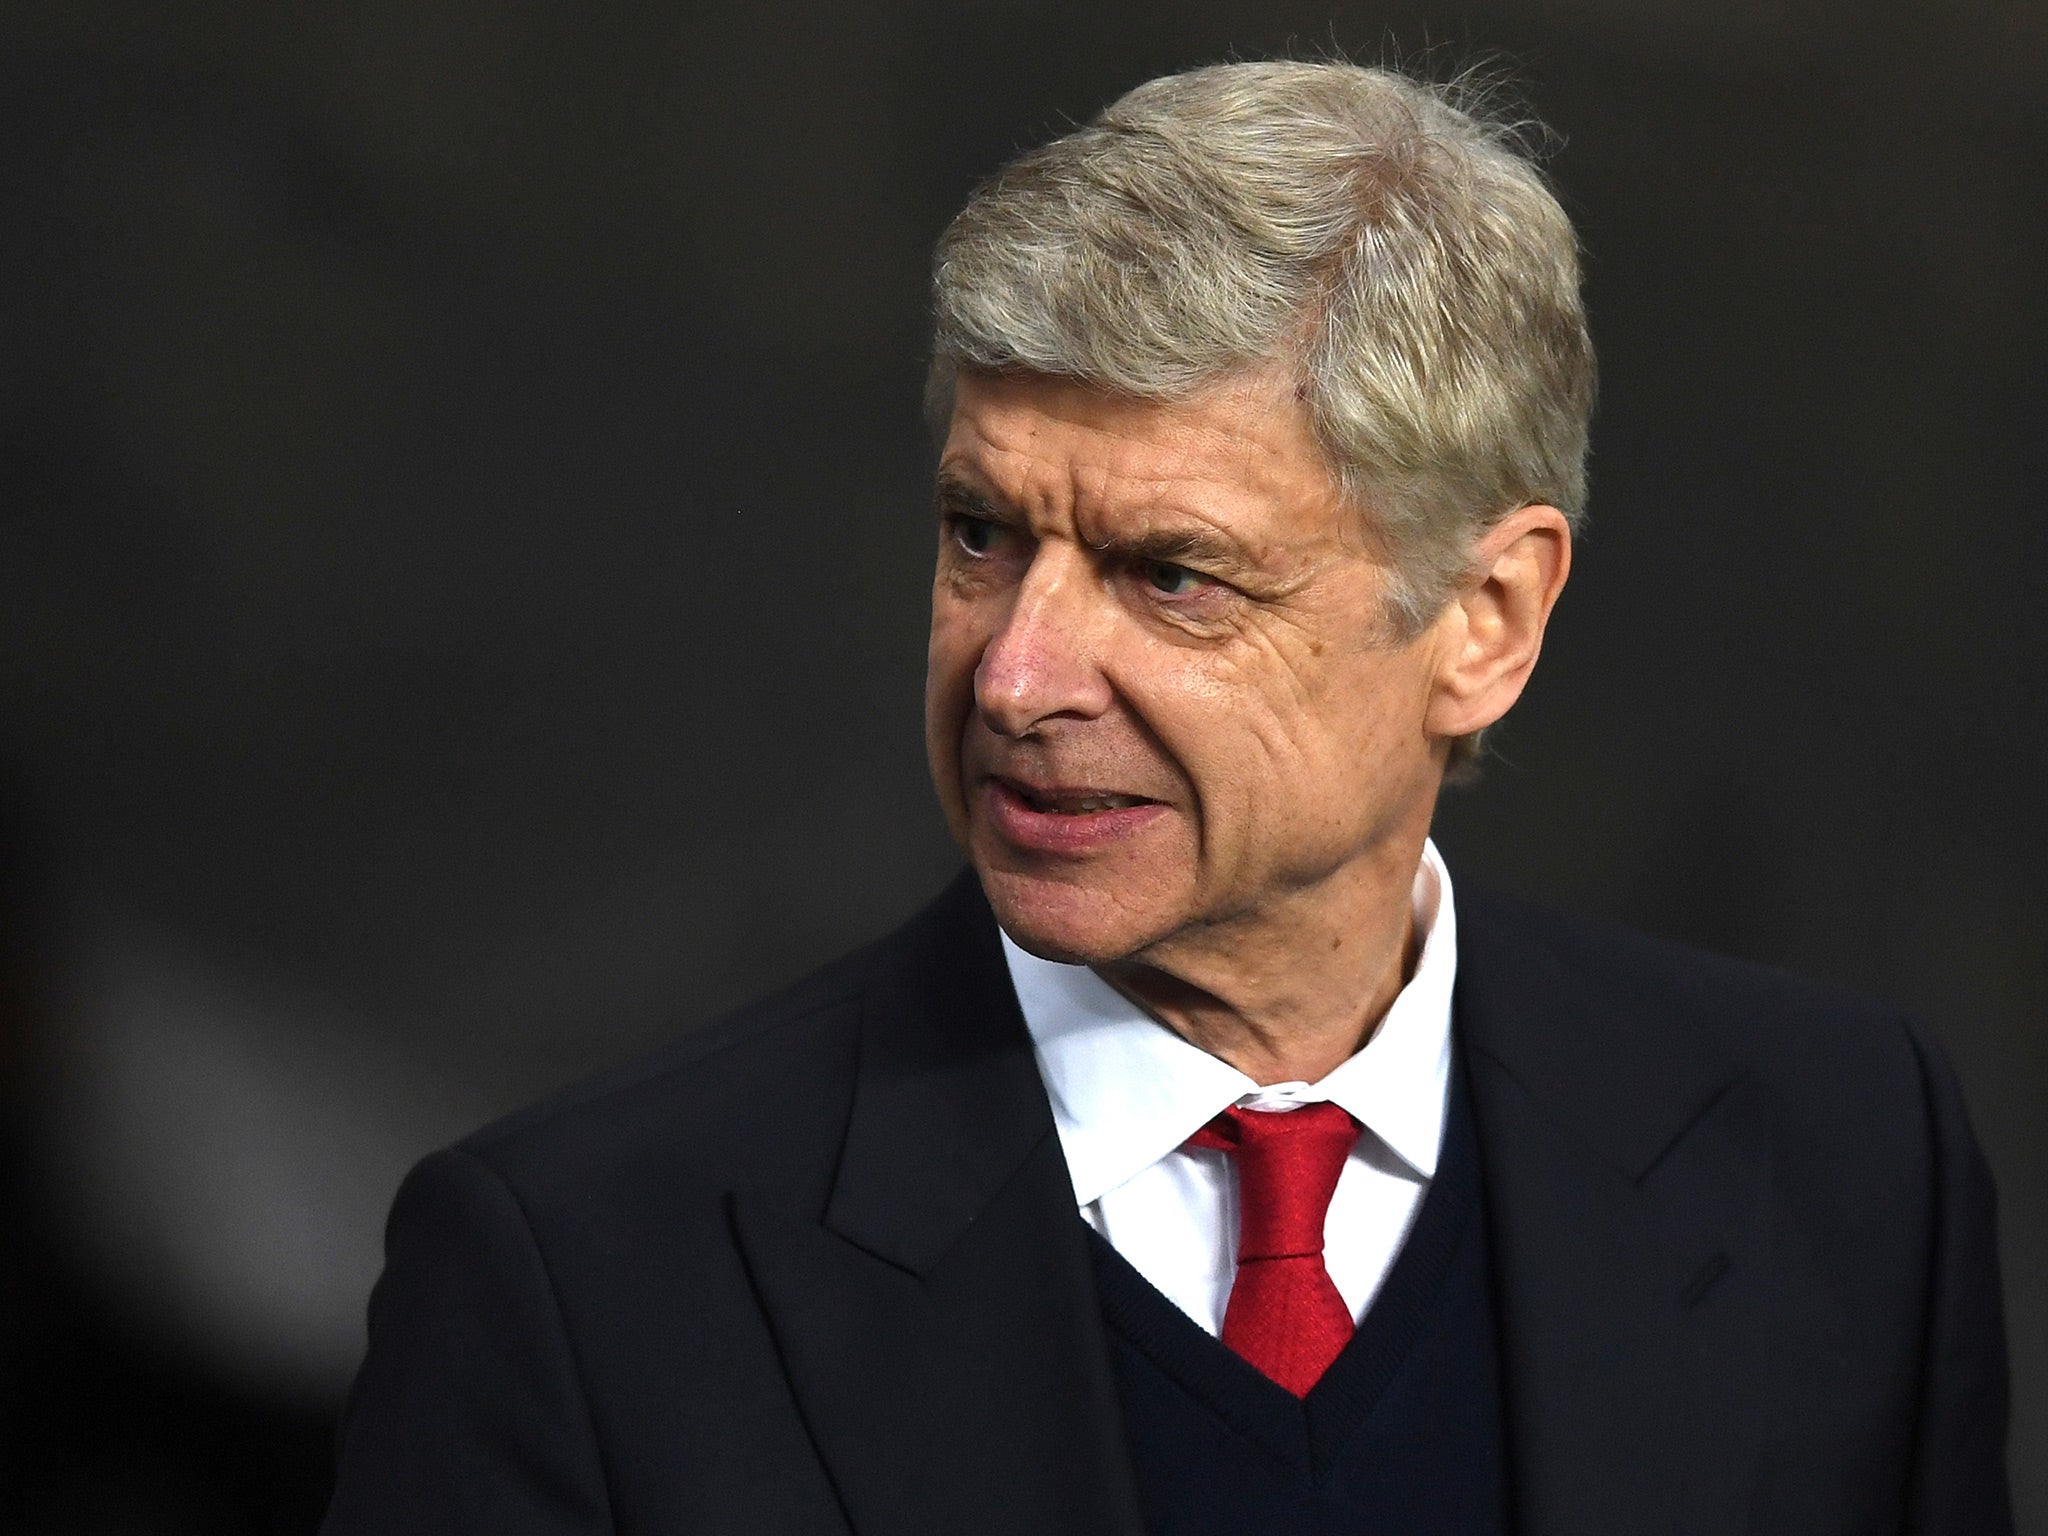 Wenger plans to wait until the spring before signing renewed terms